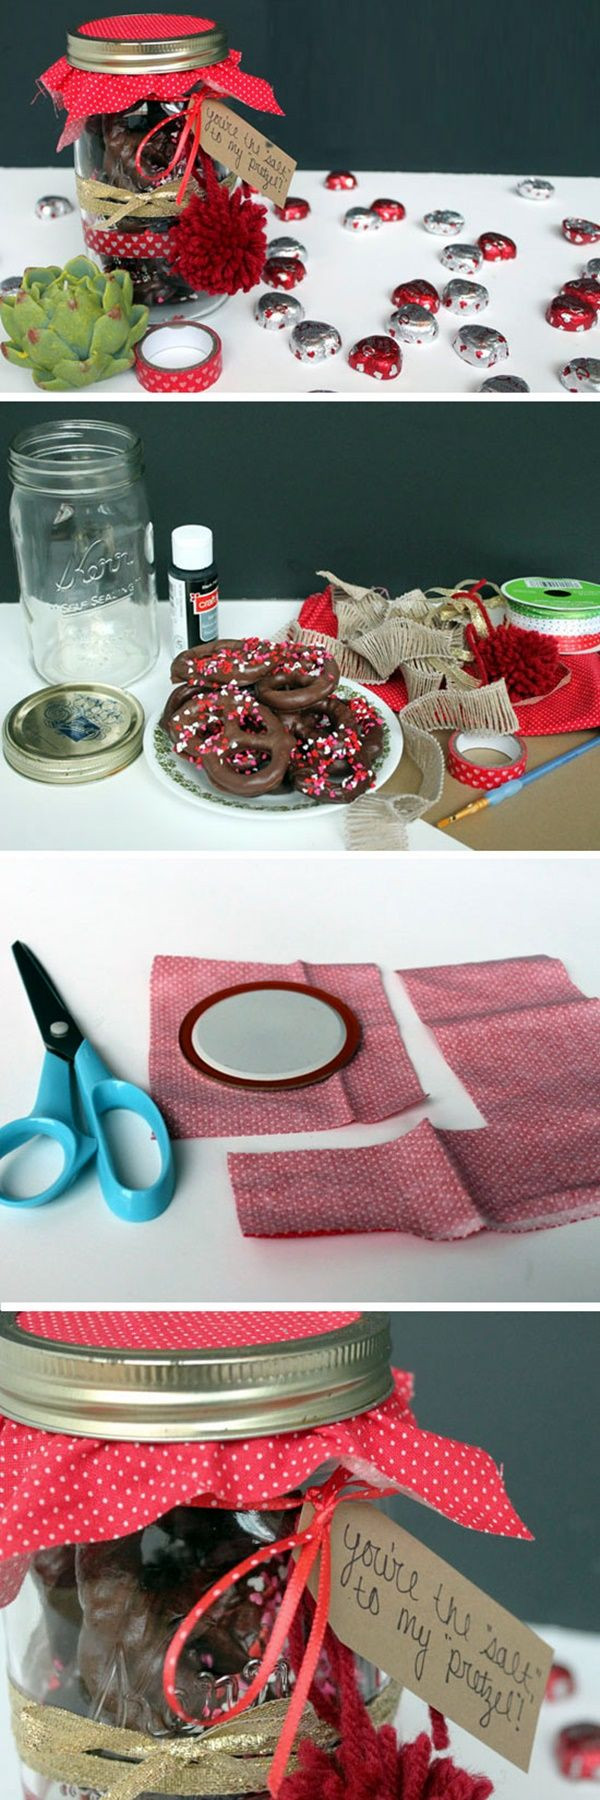 Romantic Valentines Day Ideas For Him
 60 Homemade Valentines Day Ideas for Him that’re really